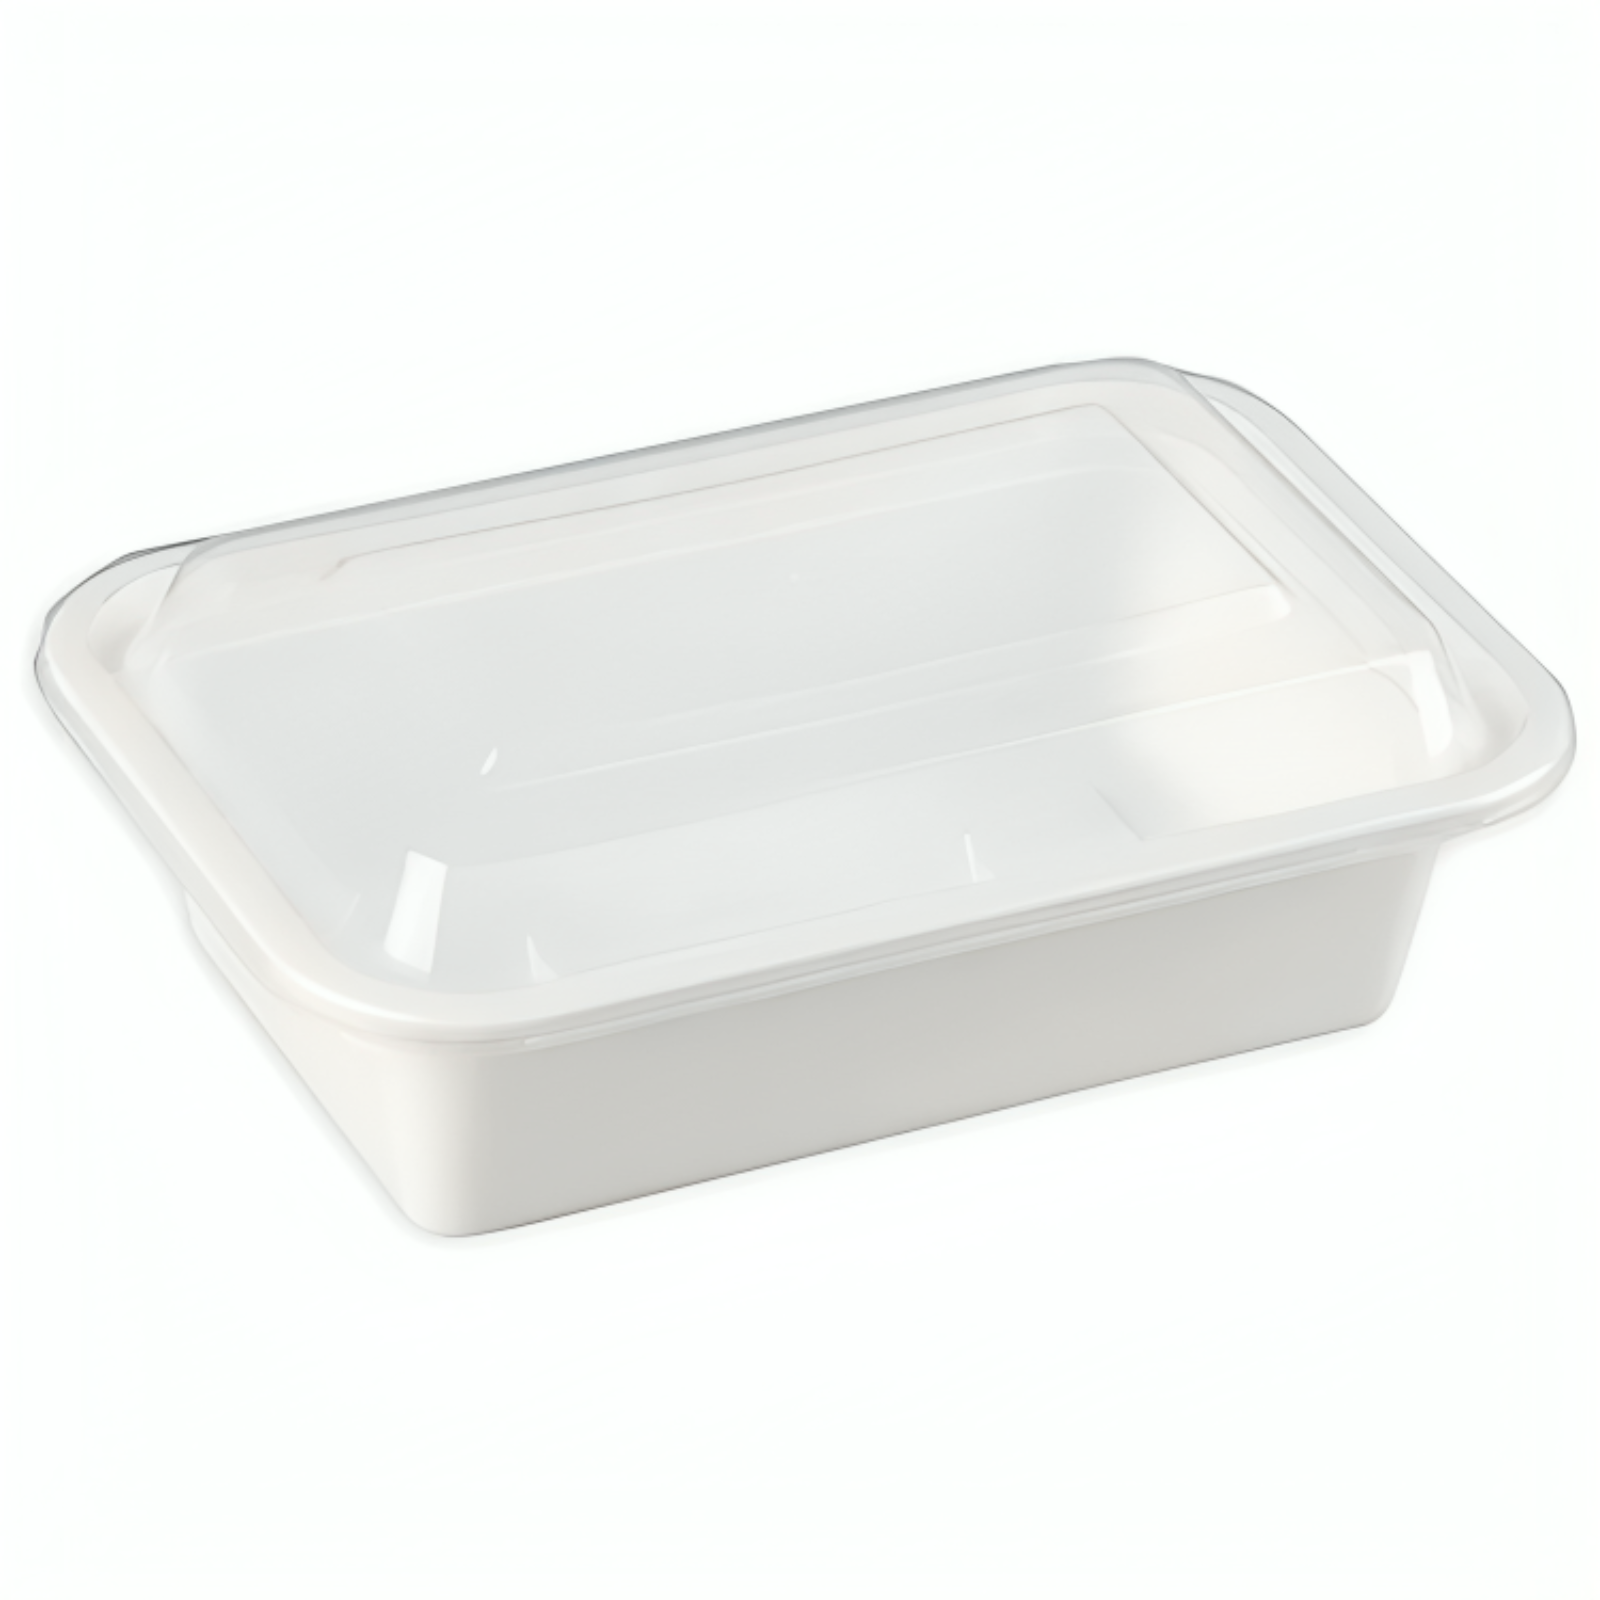 24oz Extra Strong Quality White Rectangular Meal Prep/ Bento Box Container Food Storage & Serving VeZee   